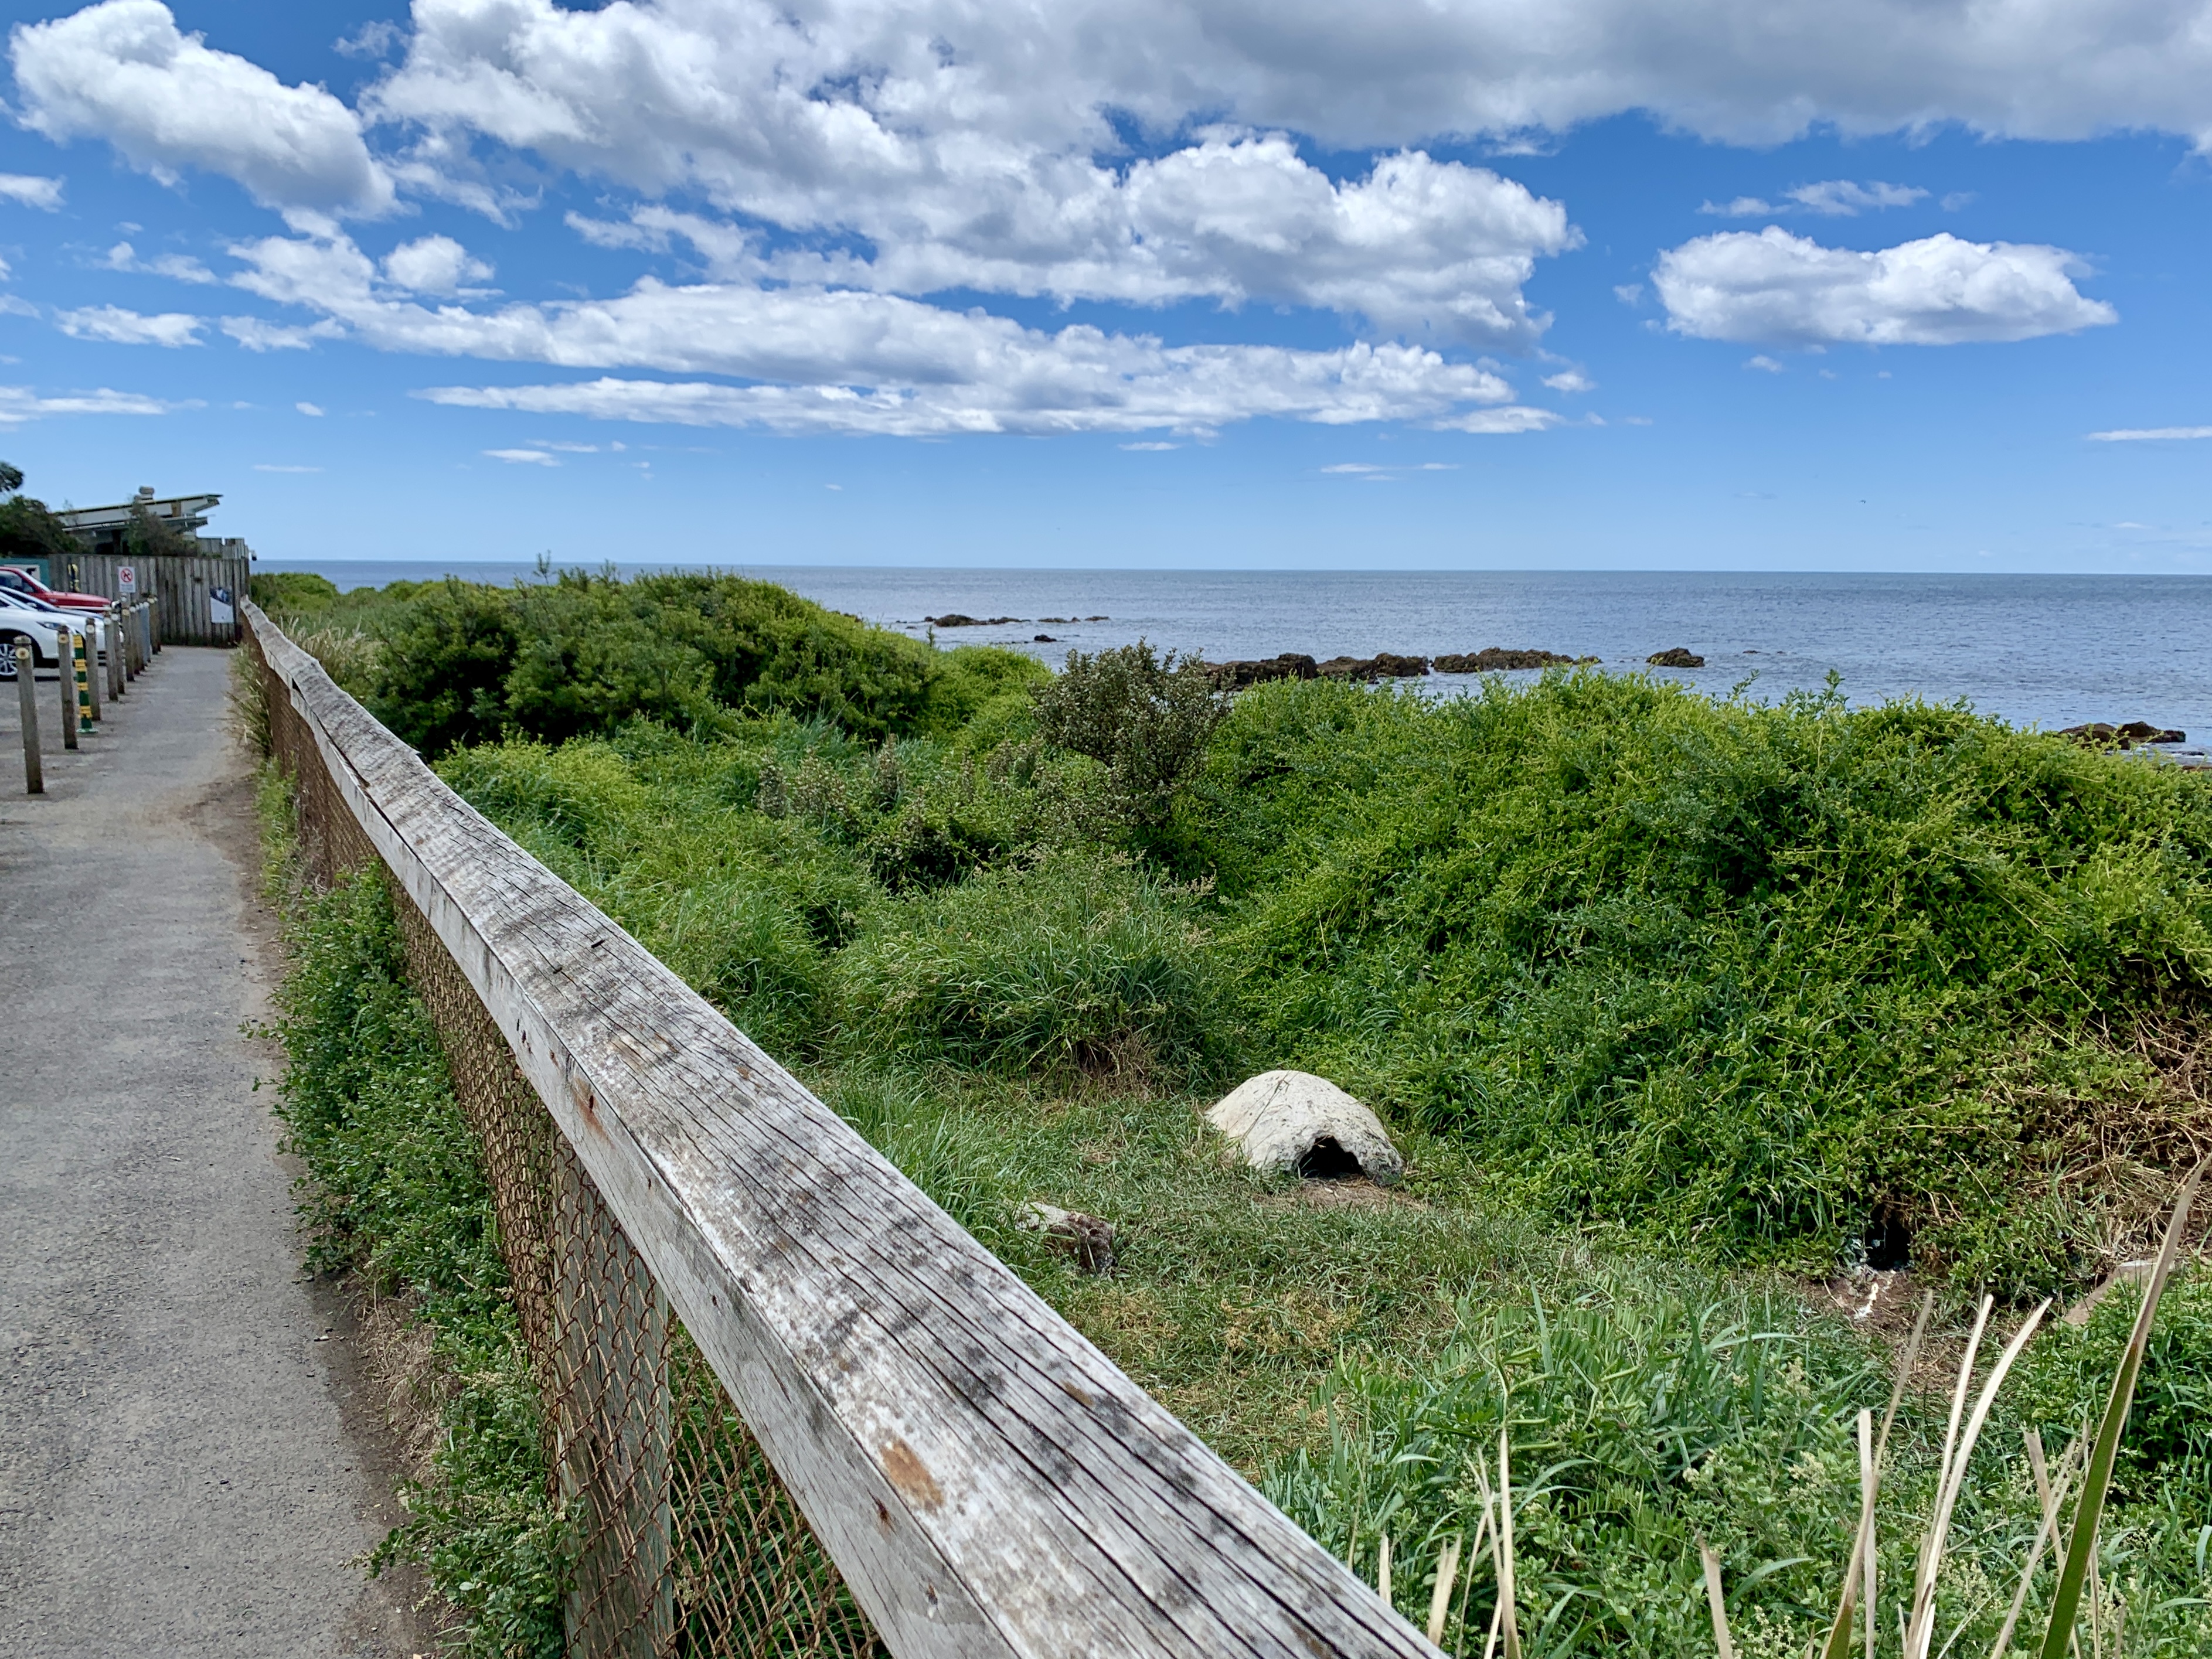 The existing coastal path and penguin habitat at West Park